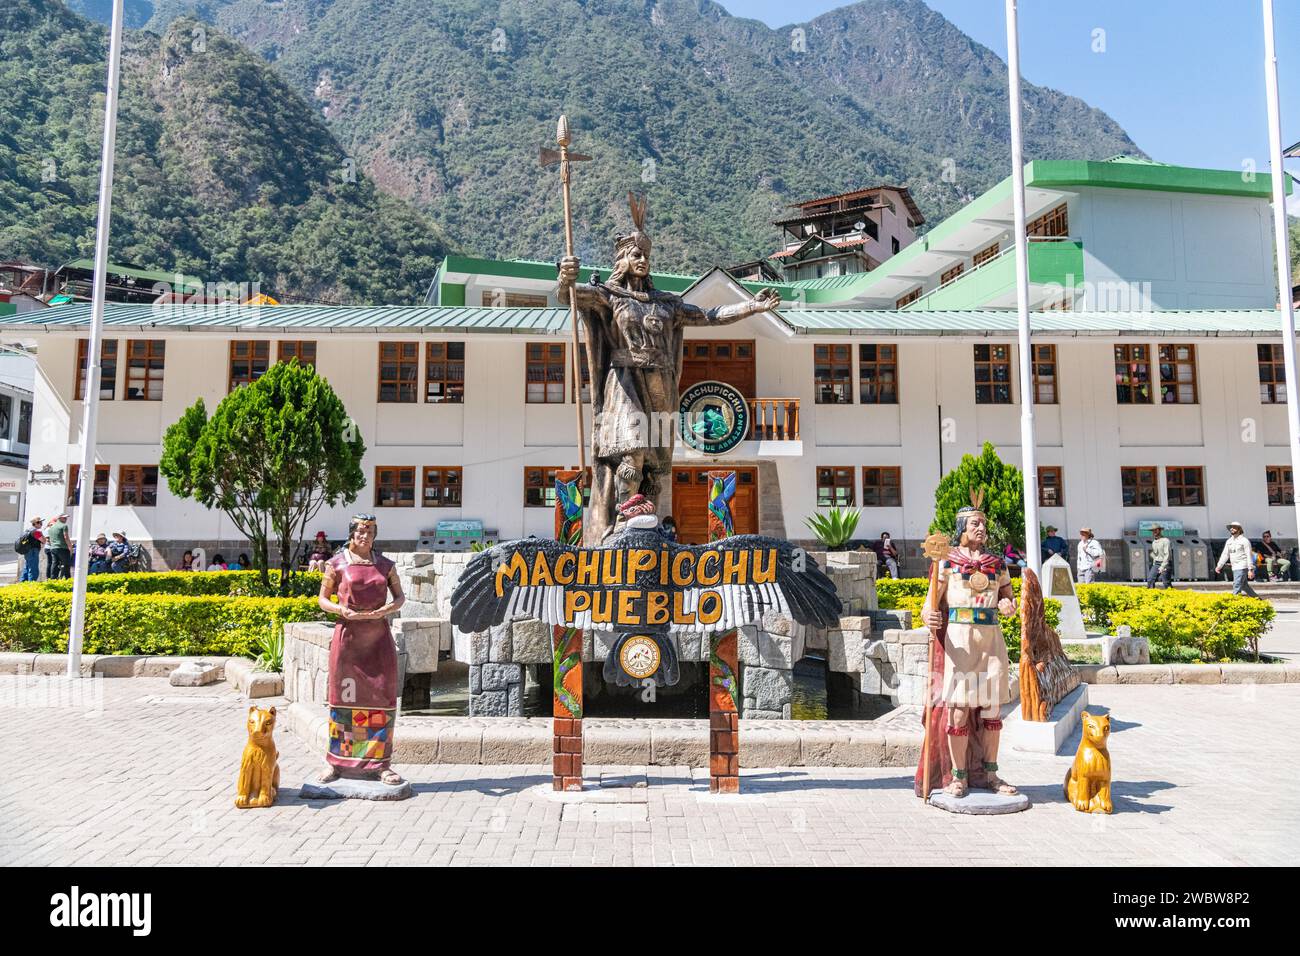 The statue of Inca Emperor Pachacutec / Pachacuti in the main square plaza of the town of Aguas Calientes near Machu Picchu in Peru Stock Photo